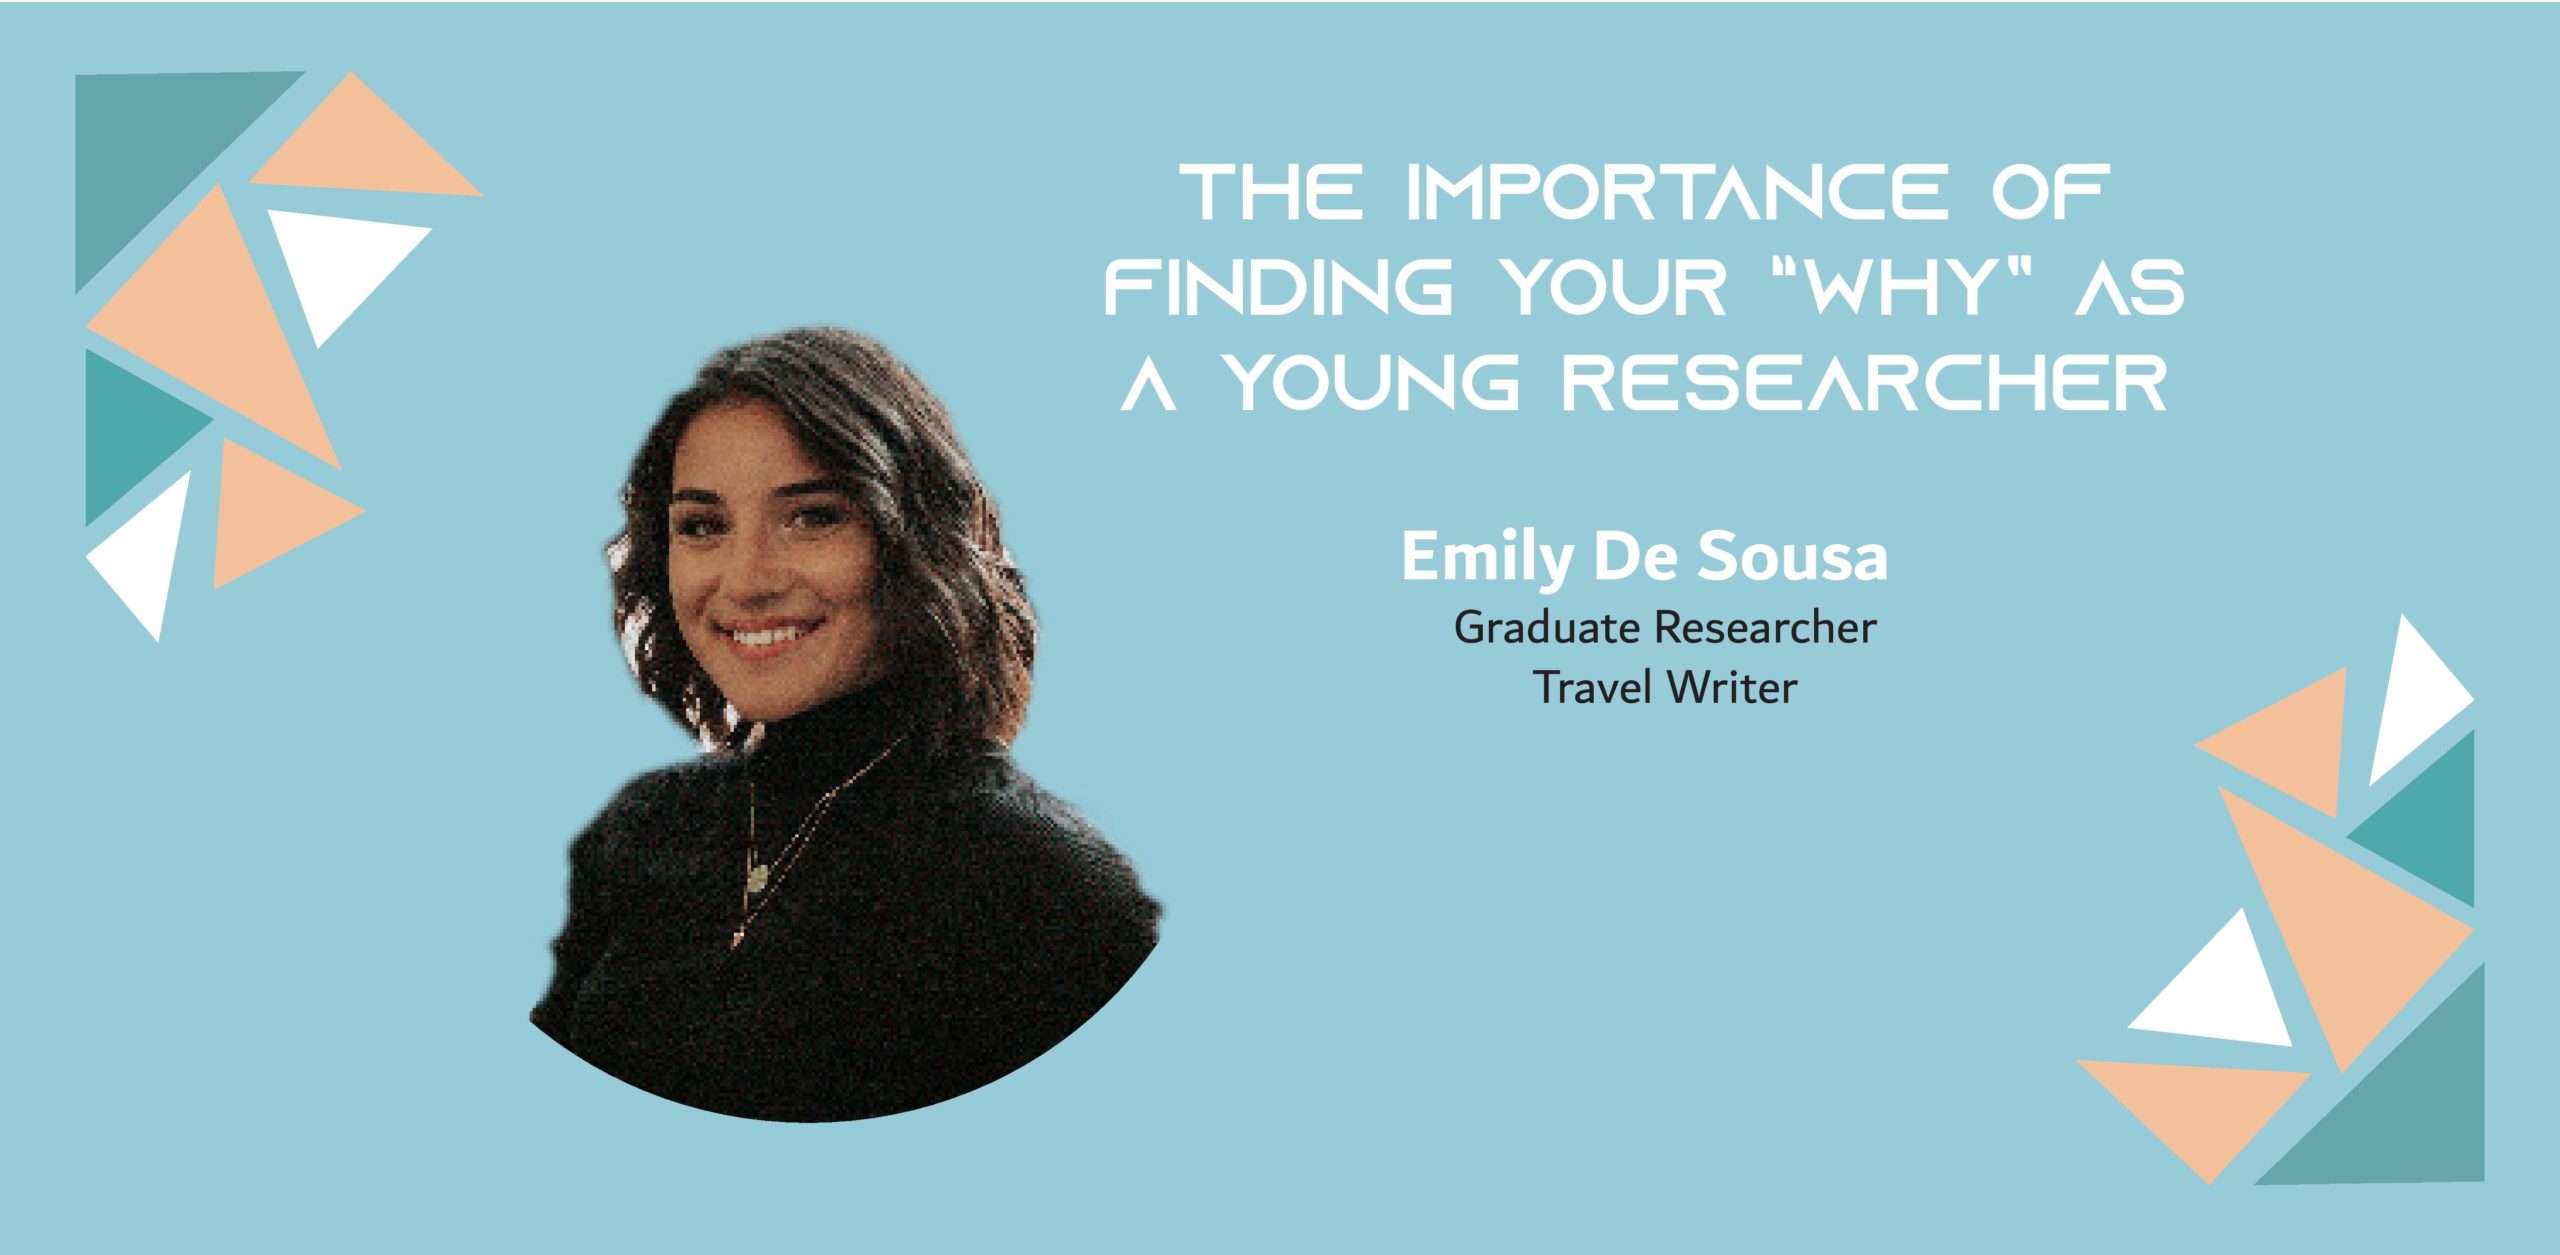 Image of a woman on a blue background with the text: "The importance of finding your “why” as a young researcher Emily de Sousa, Graduate Researcher, Travel Writer"